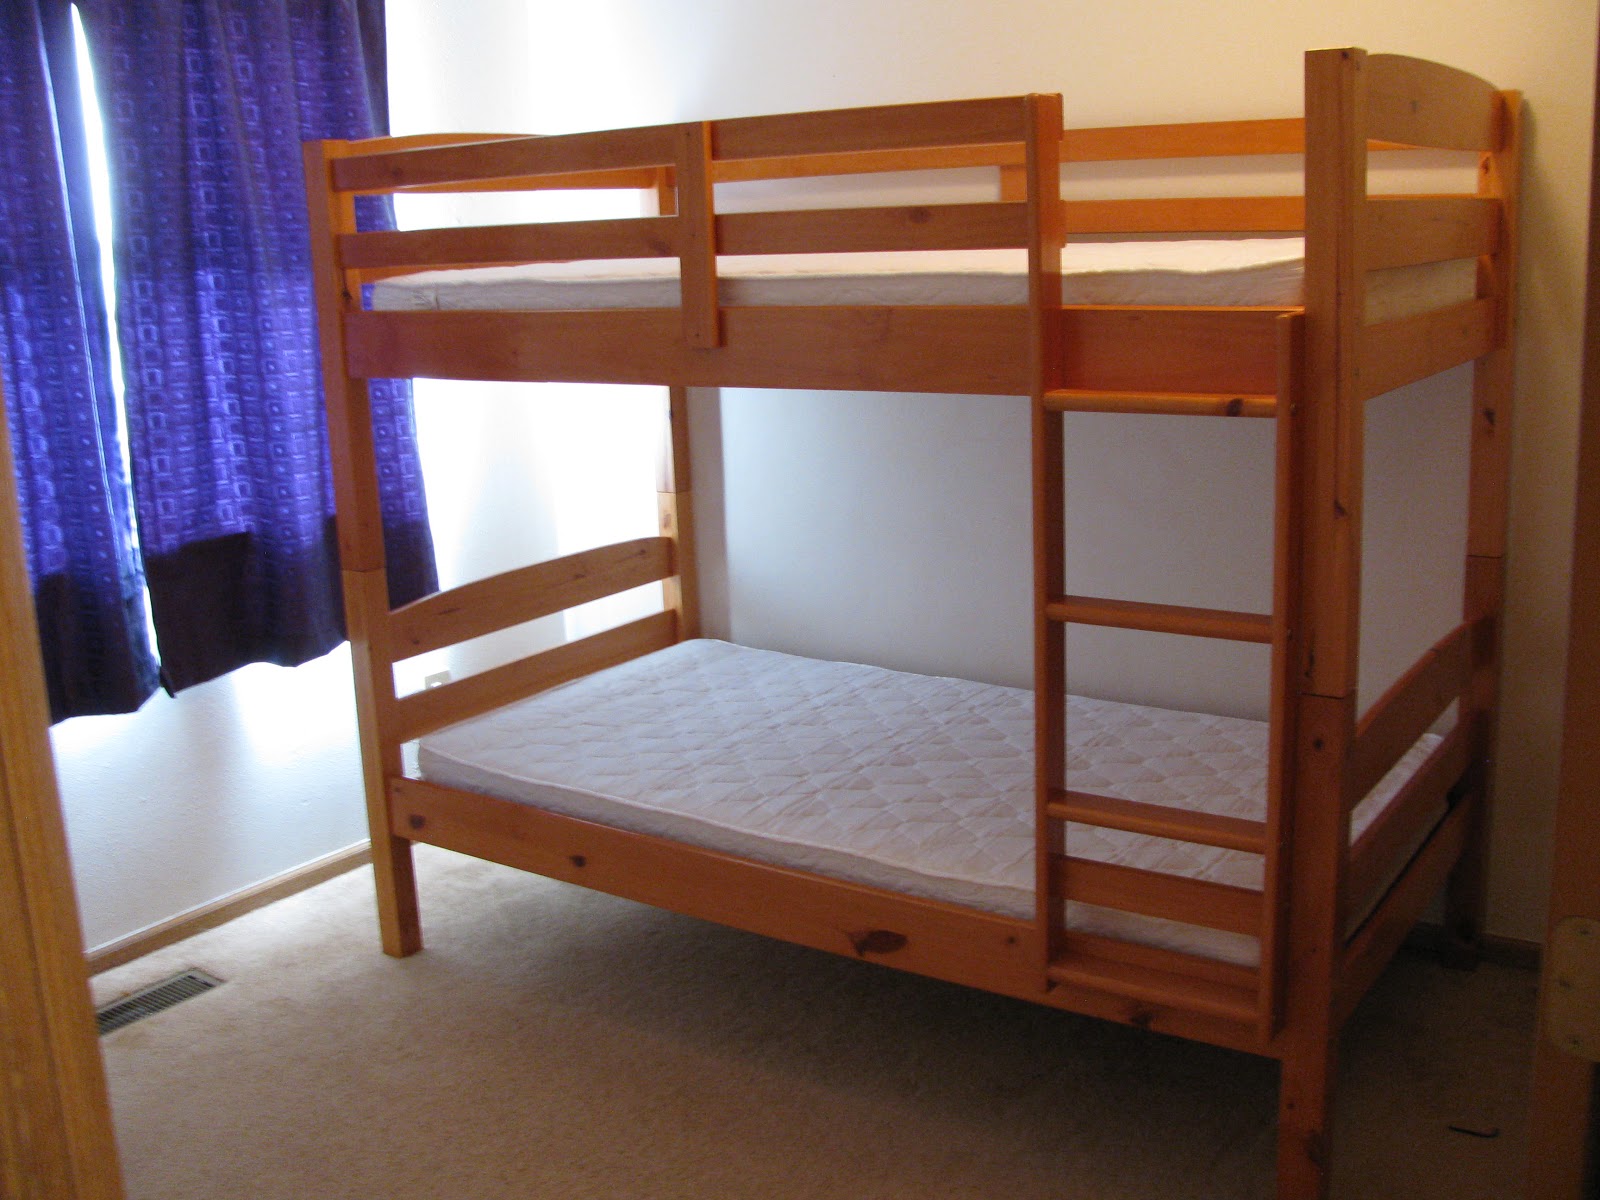 Ing Bunk Beds, Gently Used Bunk Beds